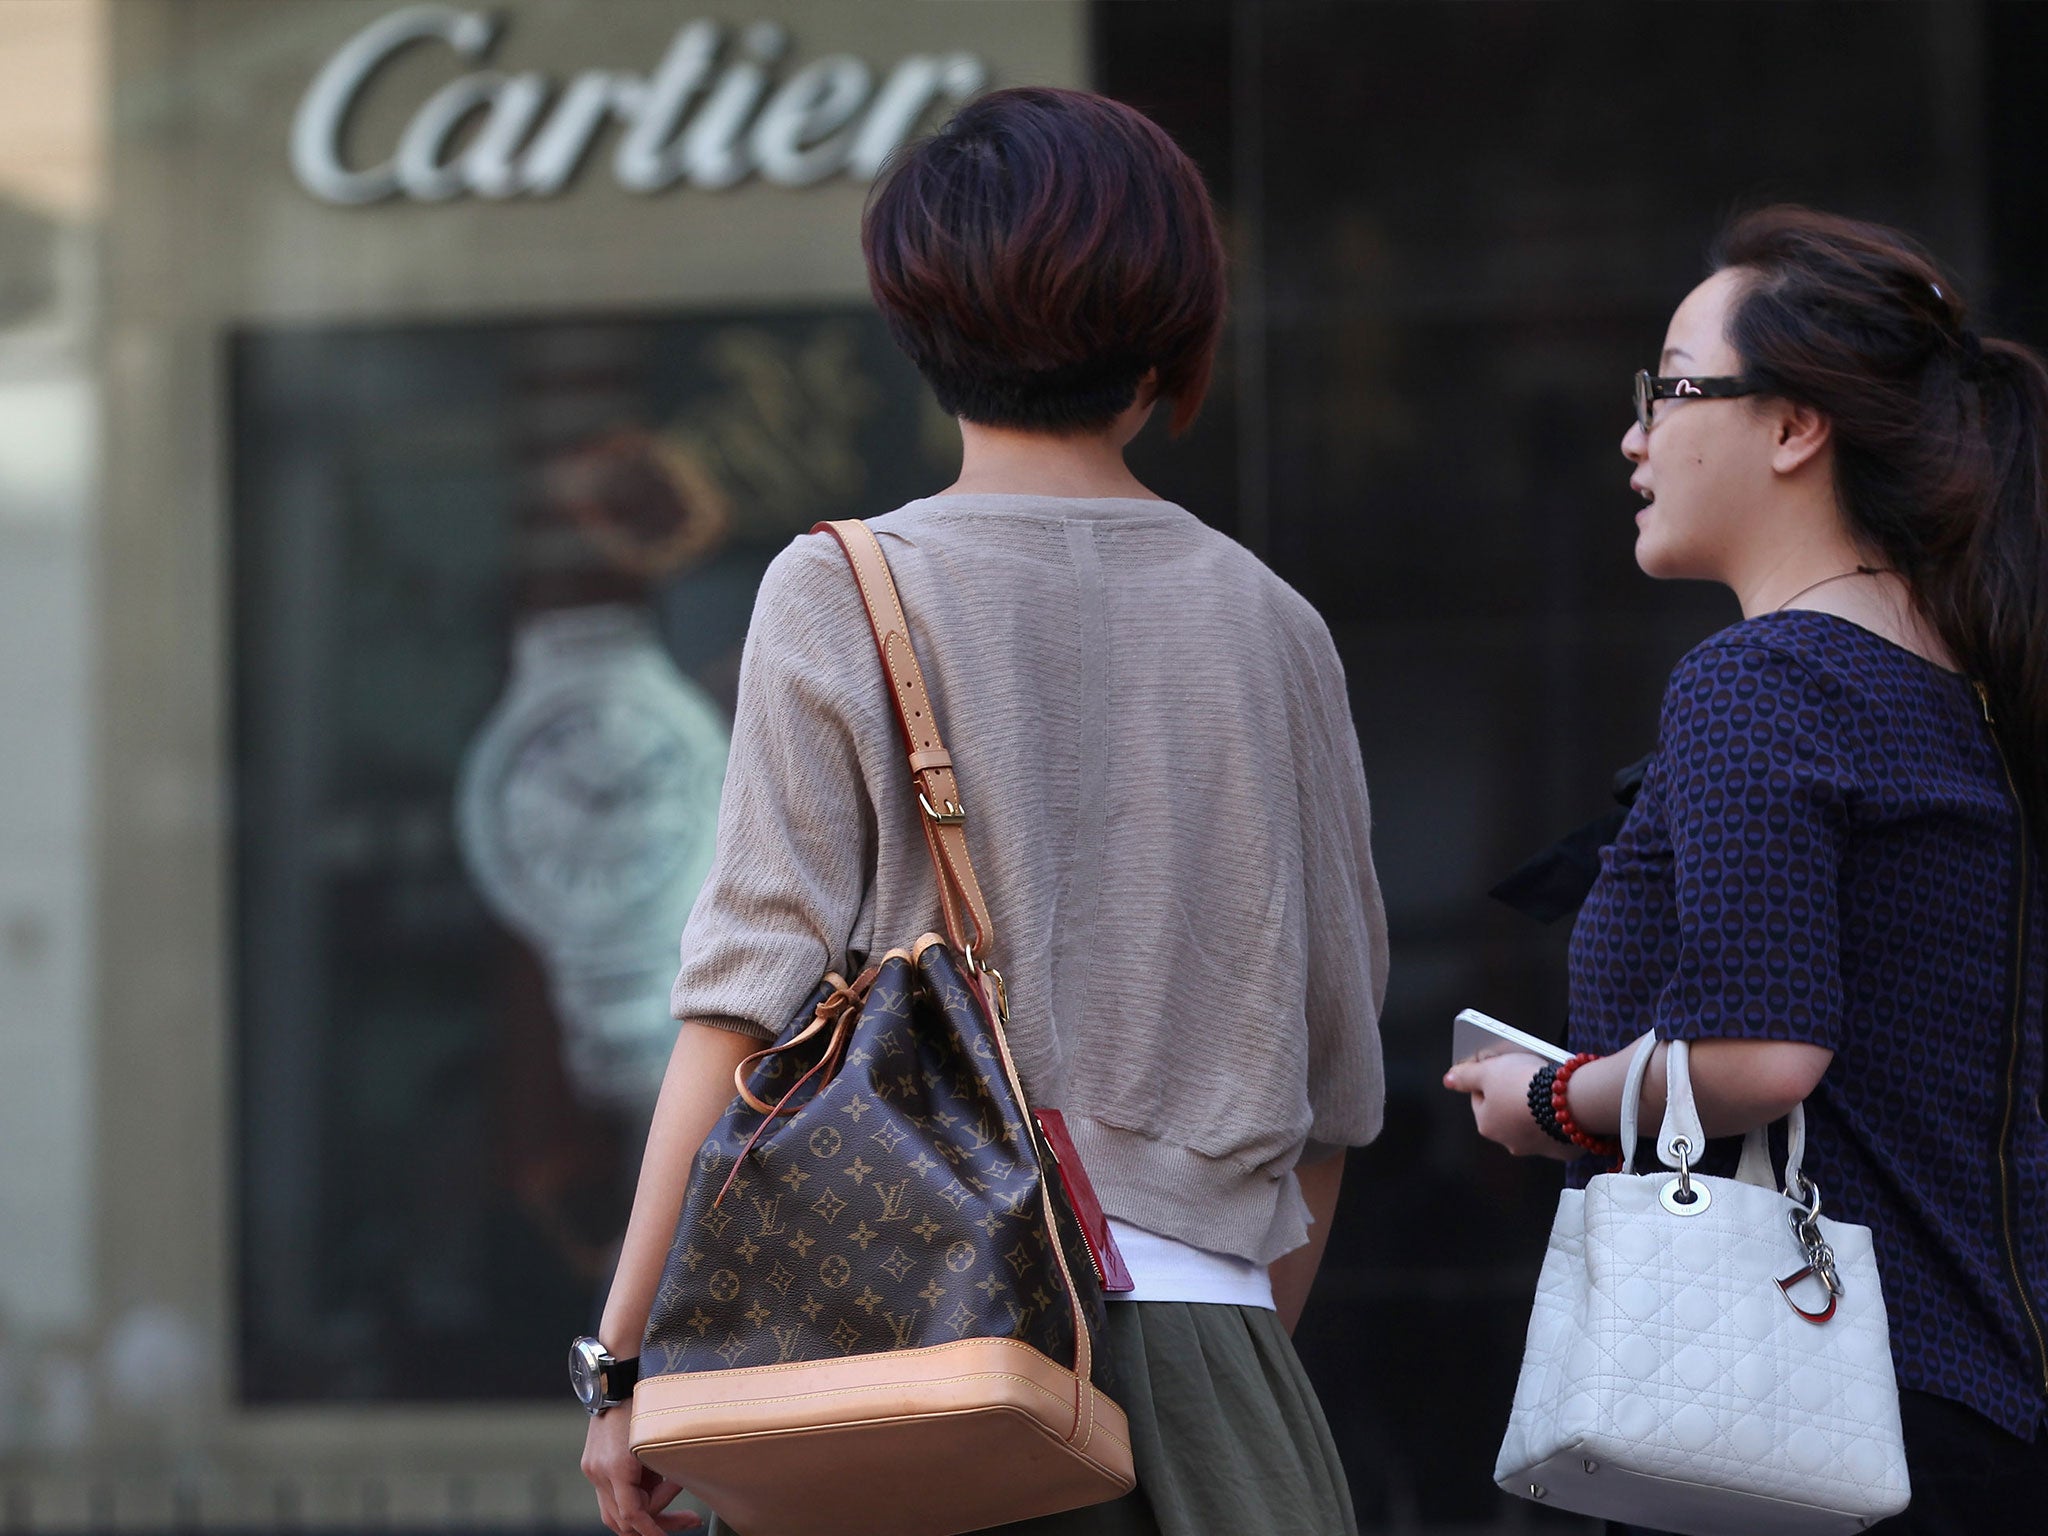 Chinese women walk past the Cartier store on June 11, 2012 in Beijing, China.